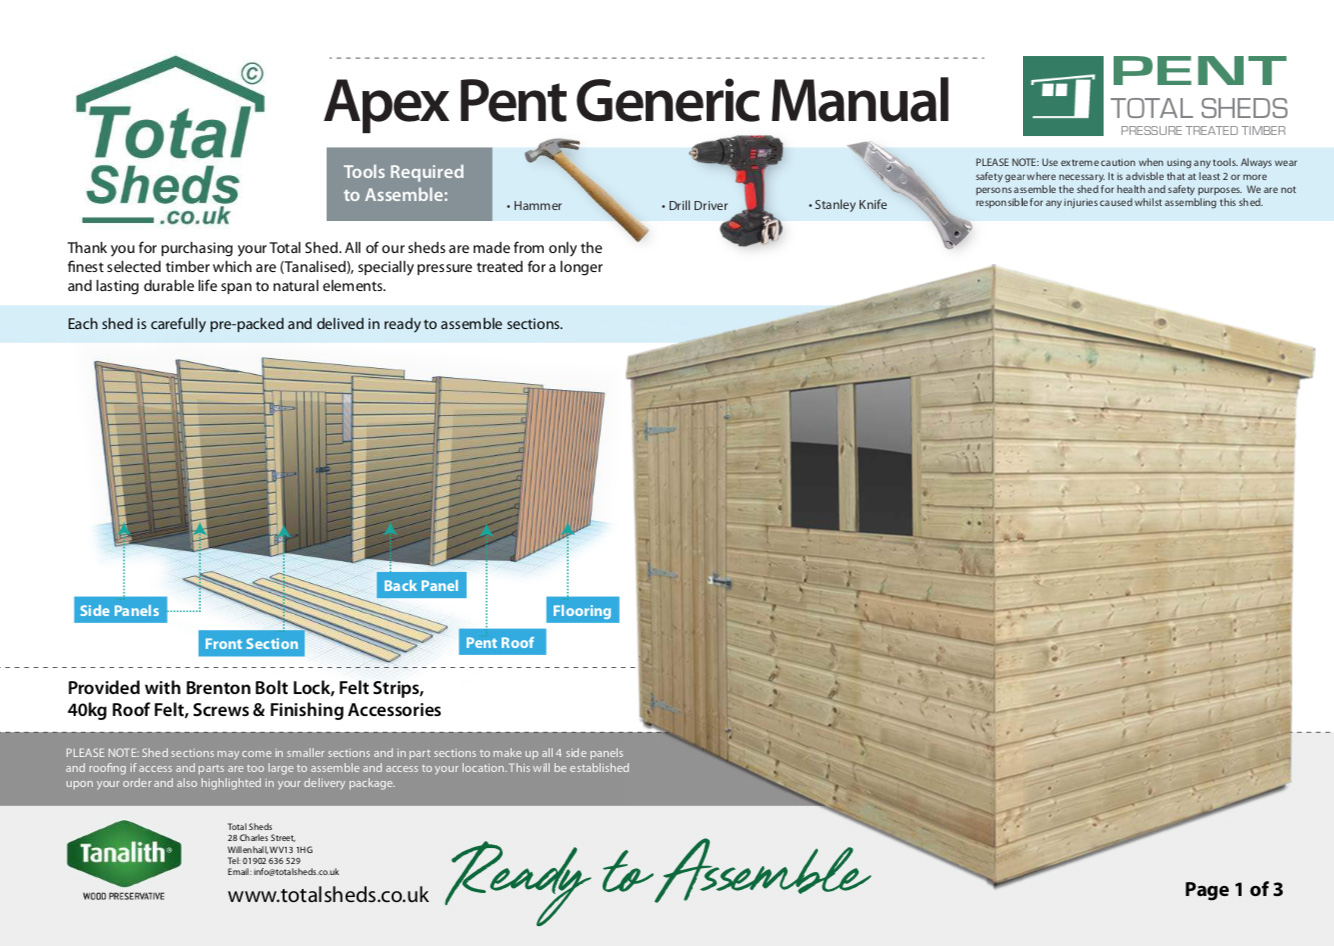 Pent Shed Installation Guide